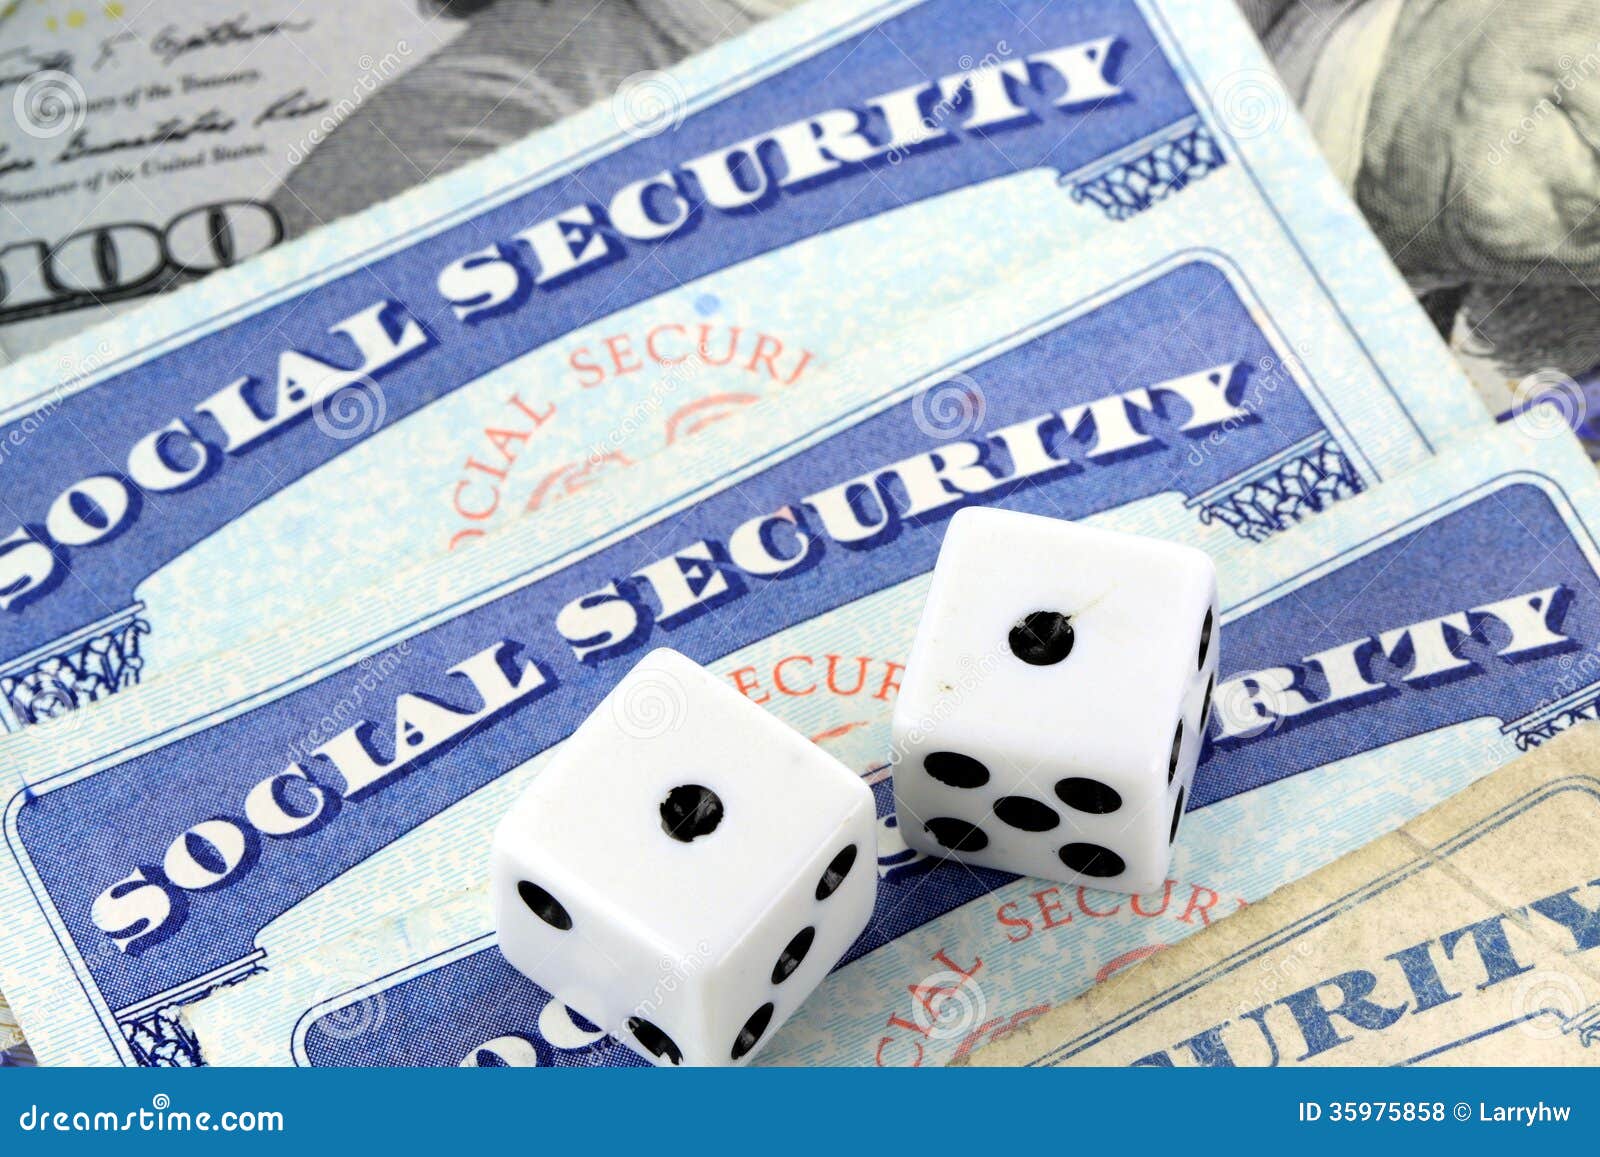 White Dice Laying On Social Security Card Stock Photo - Image of concept, dice: 35975858